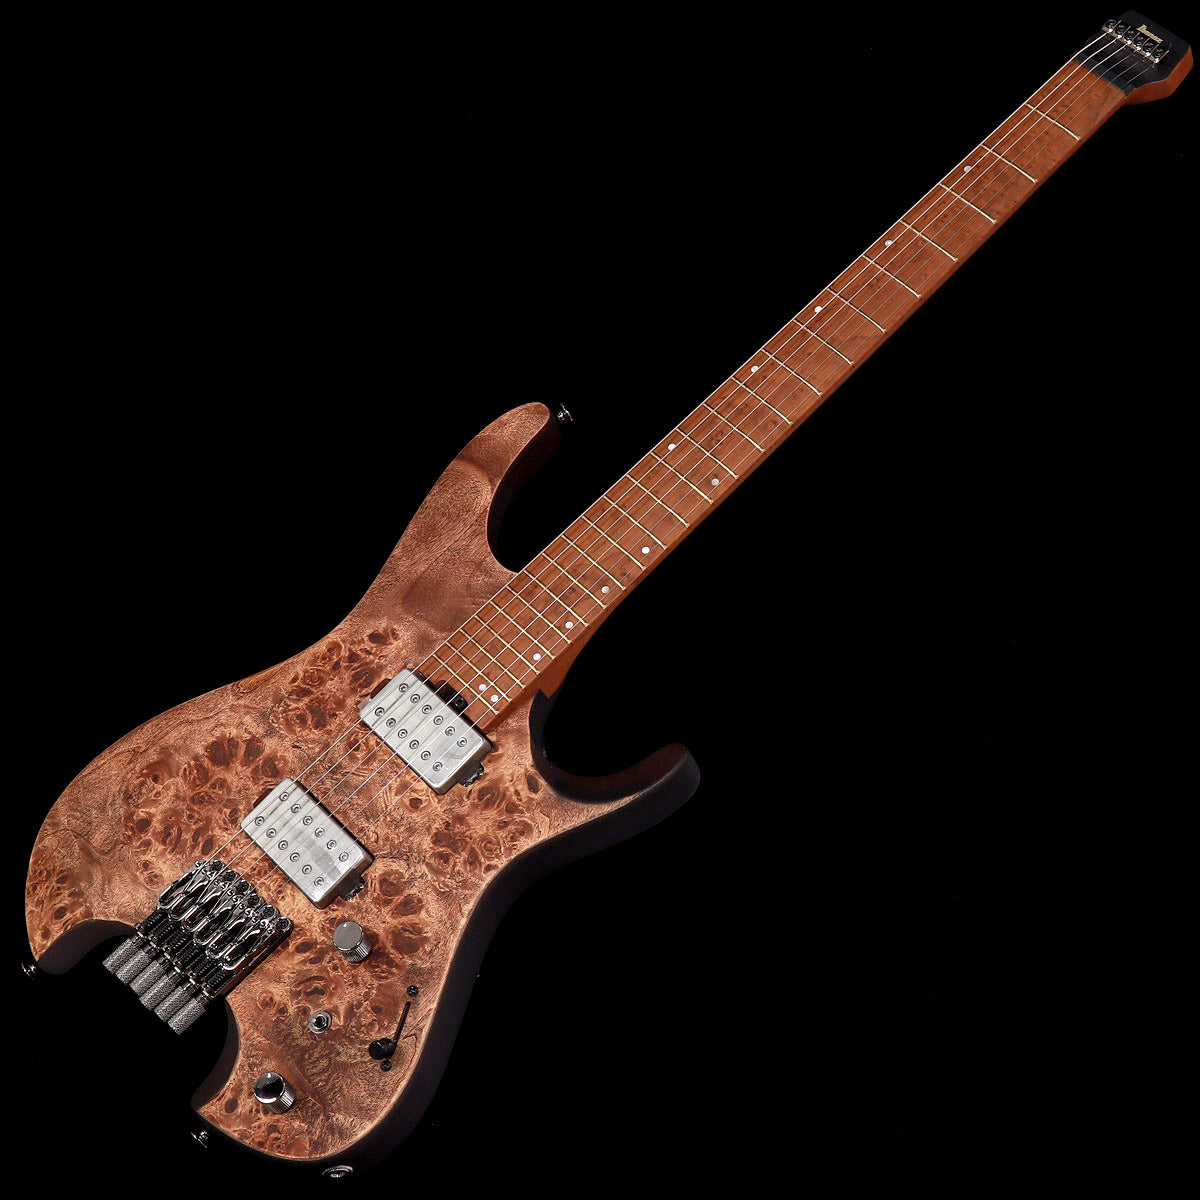 [SN I230513623] Ibanez / Q Series Q52PB-ABS (Antique Brown Stained) [Limited model] [2.51kg] [08]